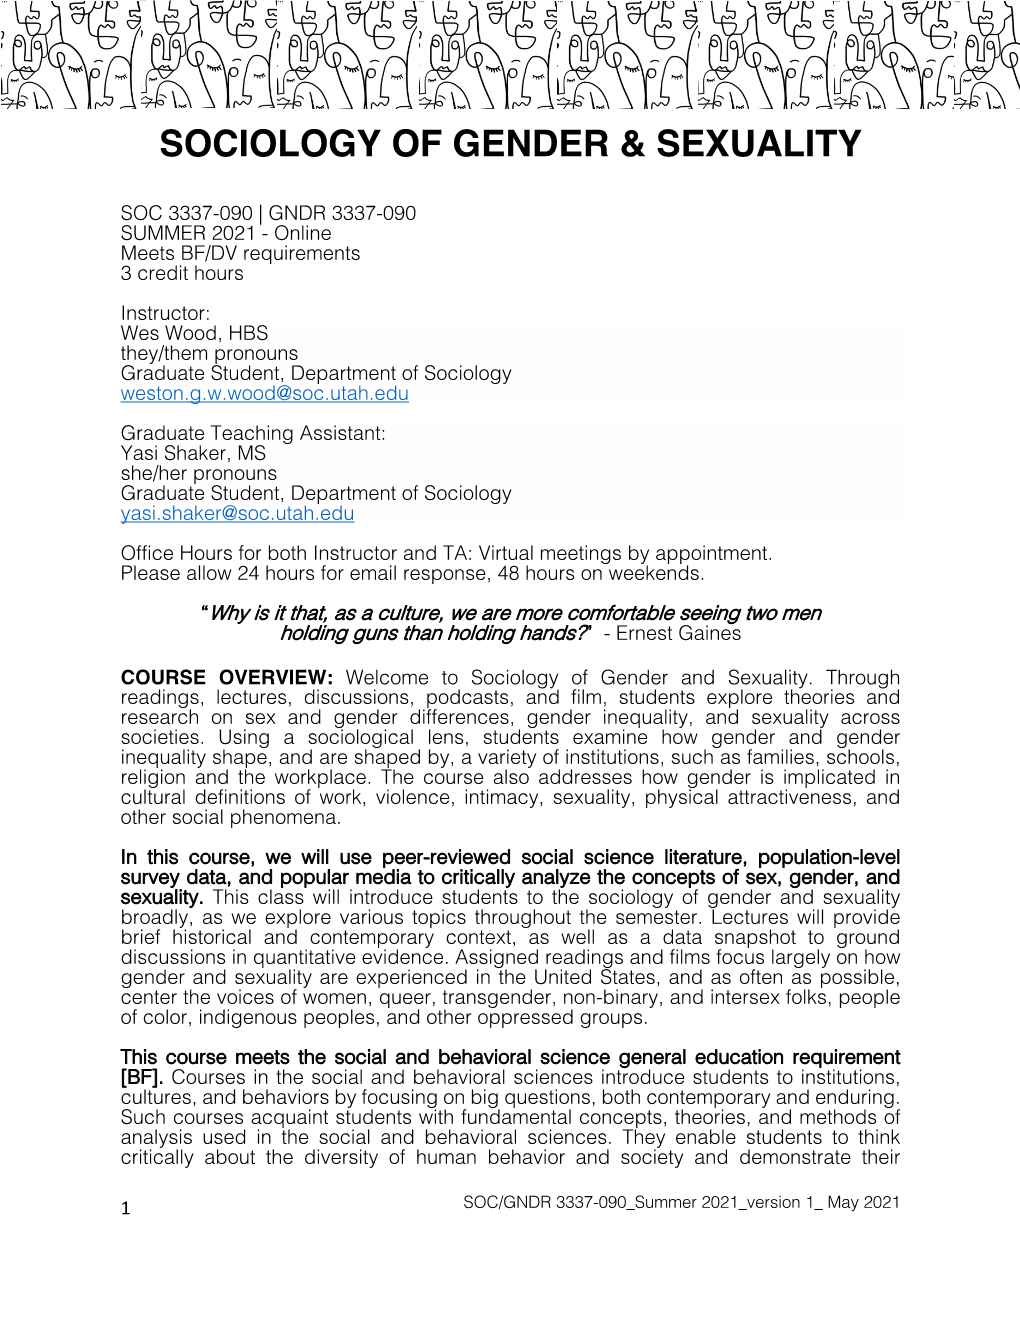 Sociology of Gender & Sexuality